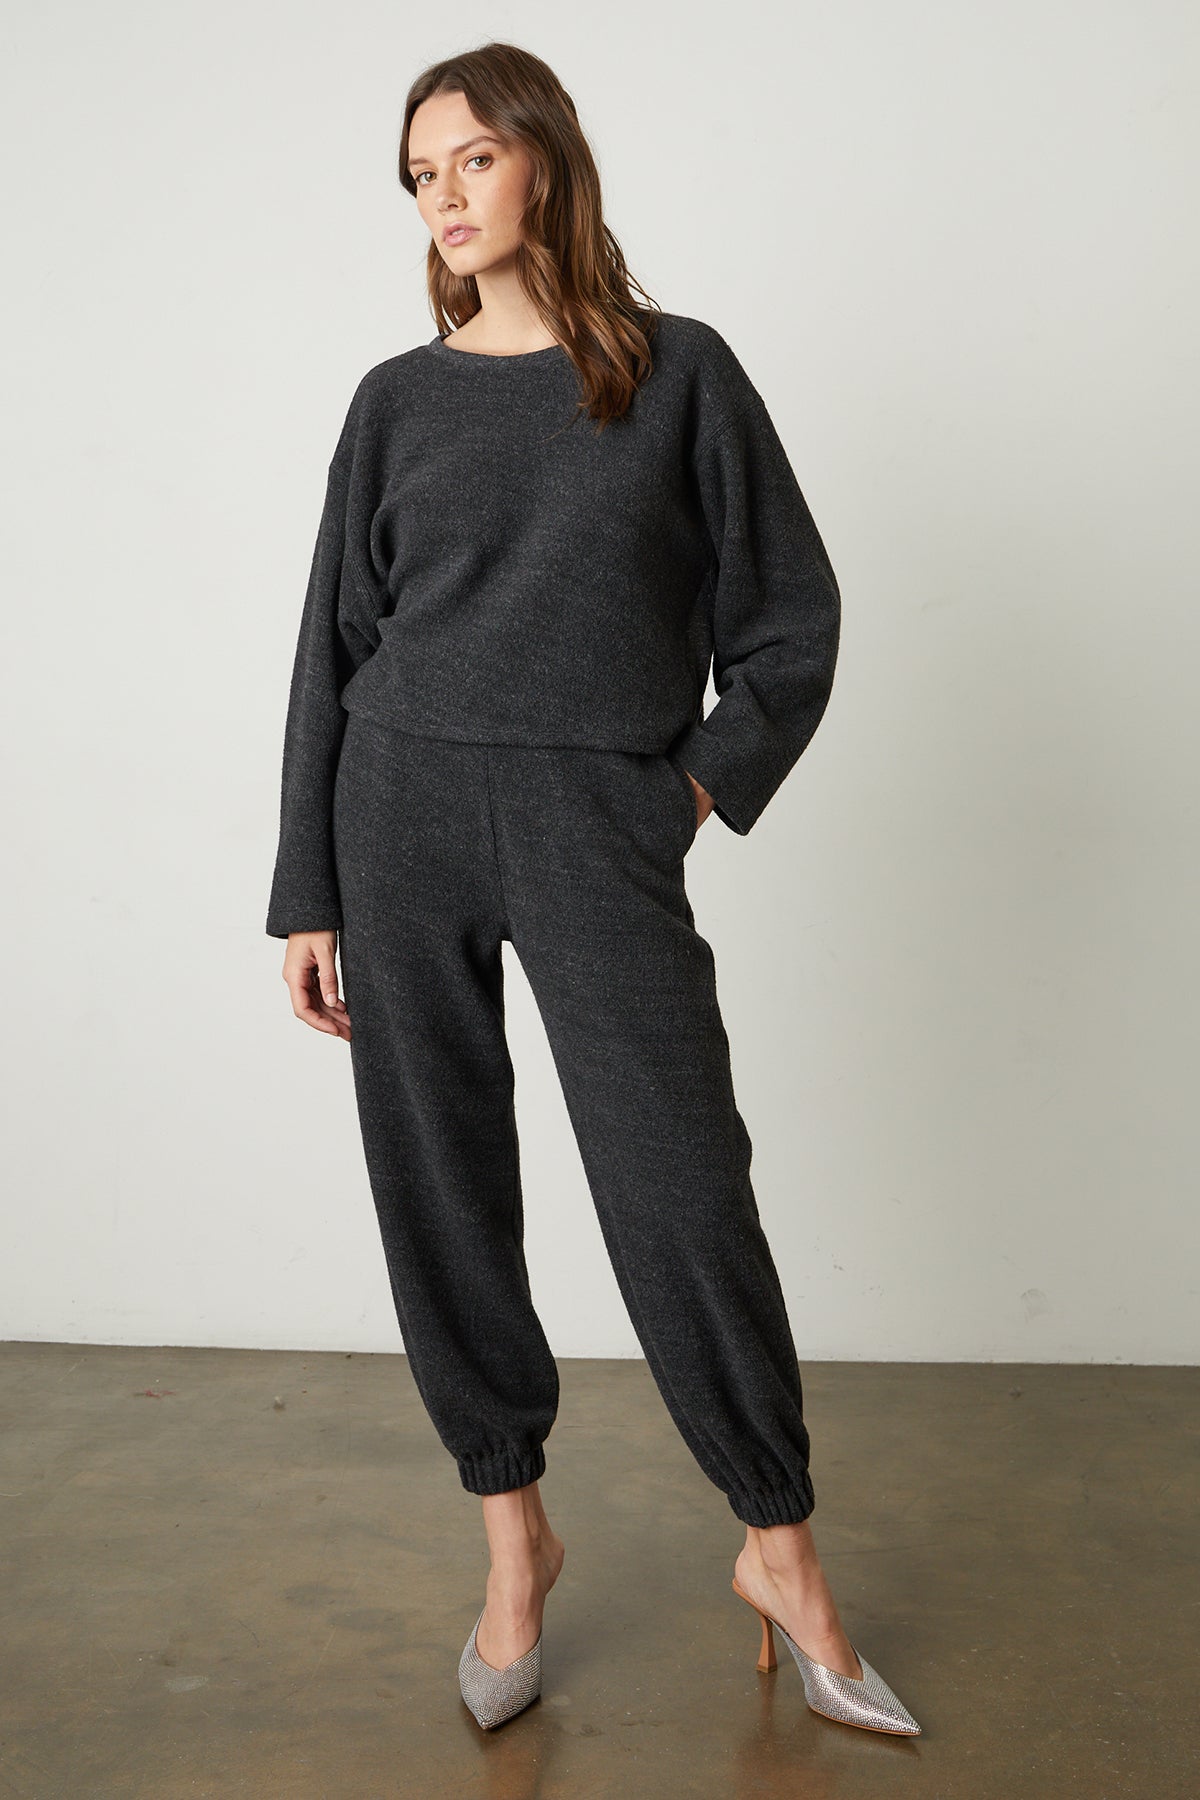   The model is wearing a Charcoal Arissa Cropped Sweatshirt and joggers from Velvet by Graham & Spencer. 